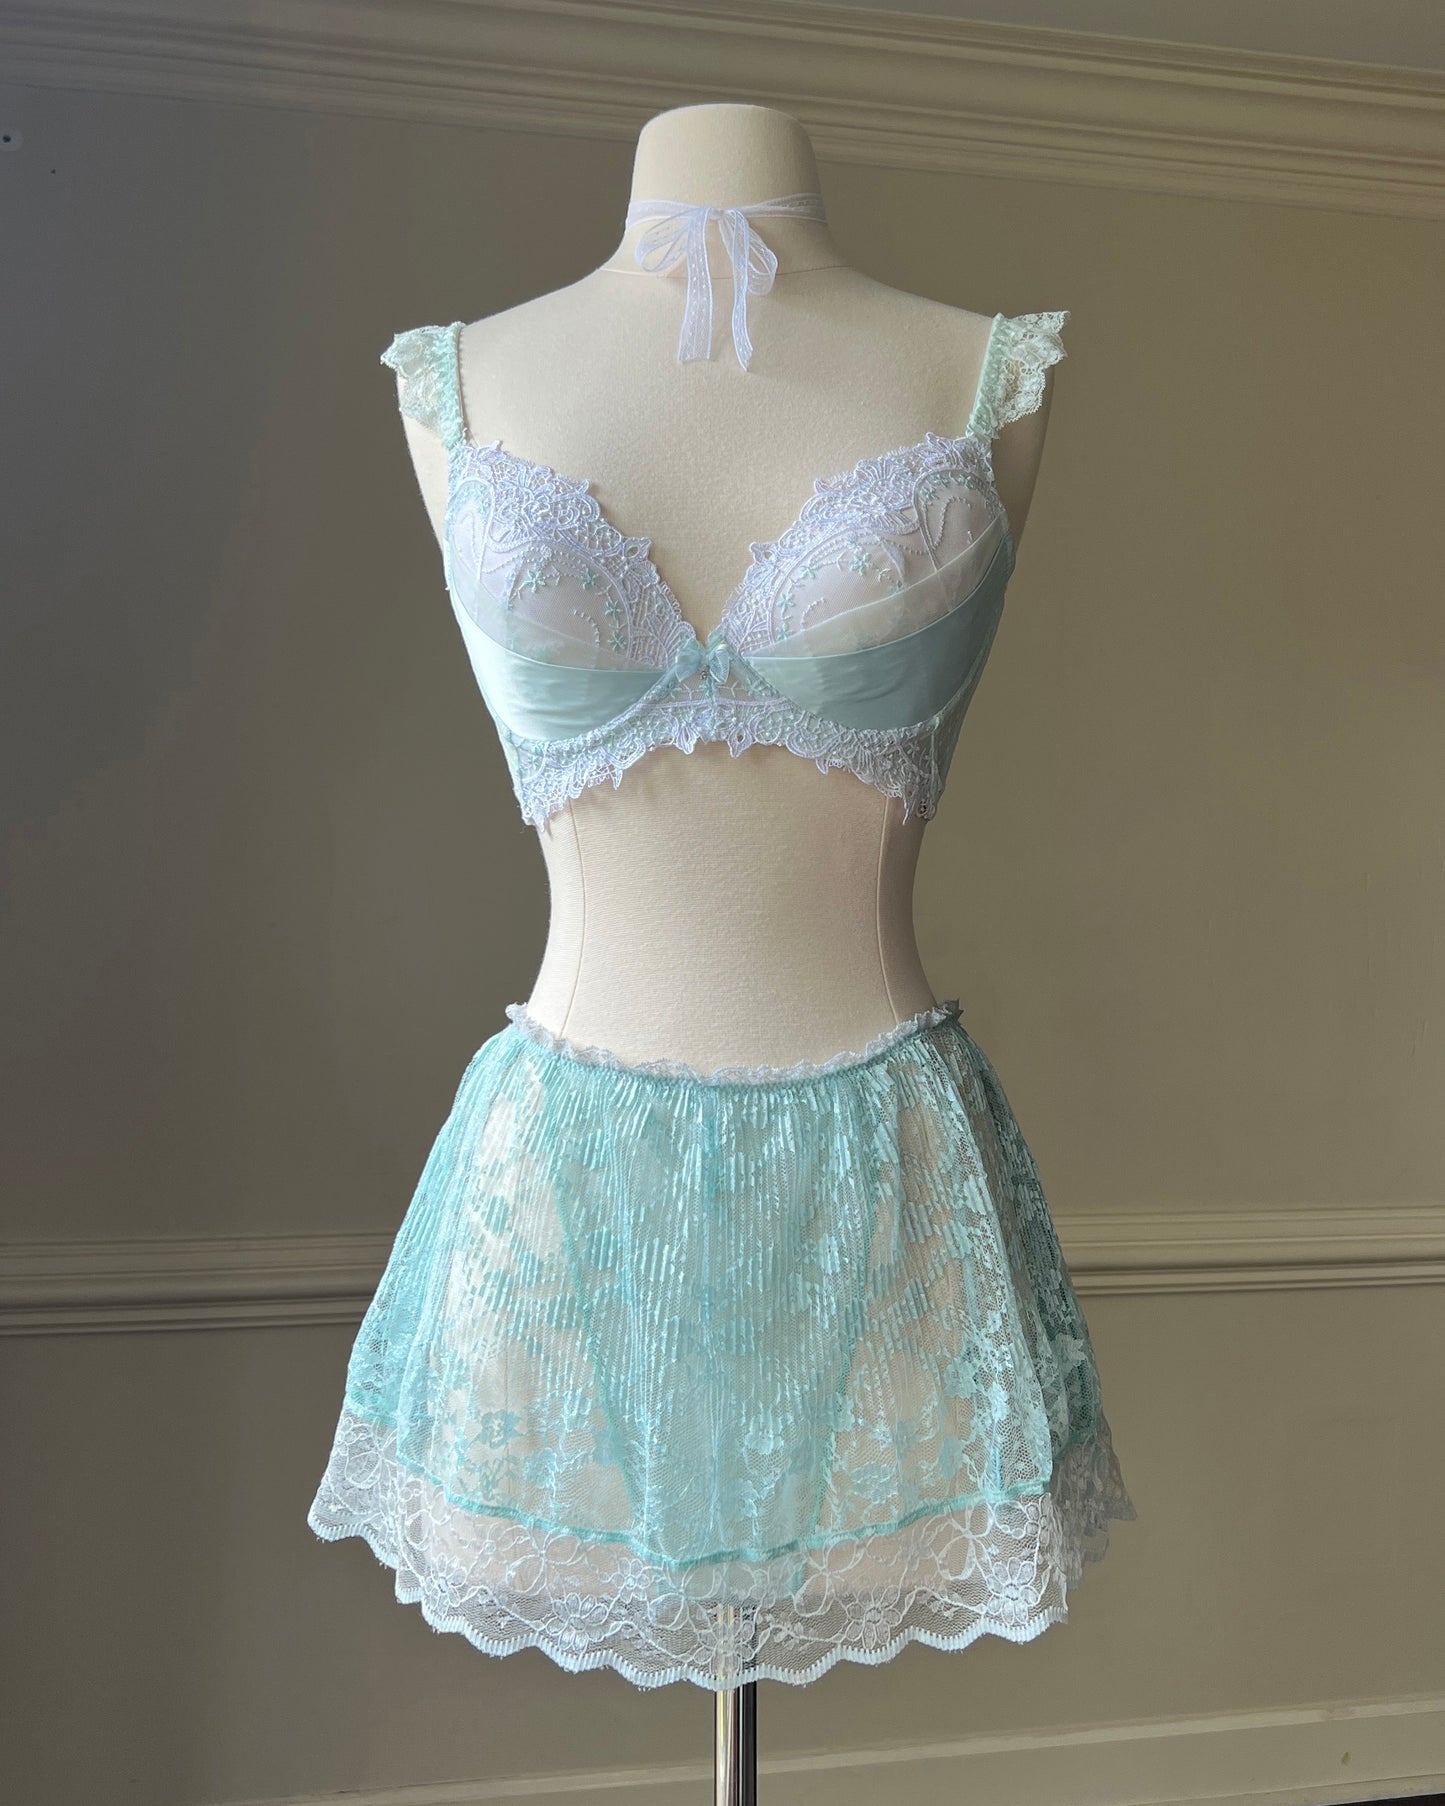 Victoria’s Secret frosty fairy split skirt featuring layered floral lace